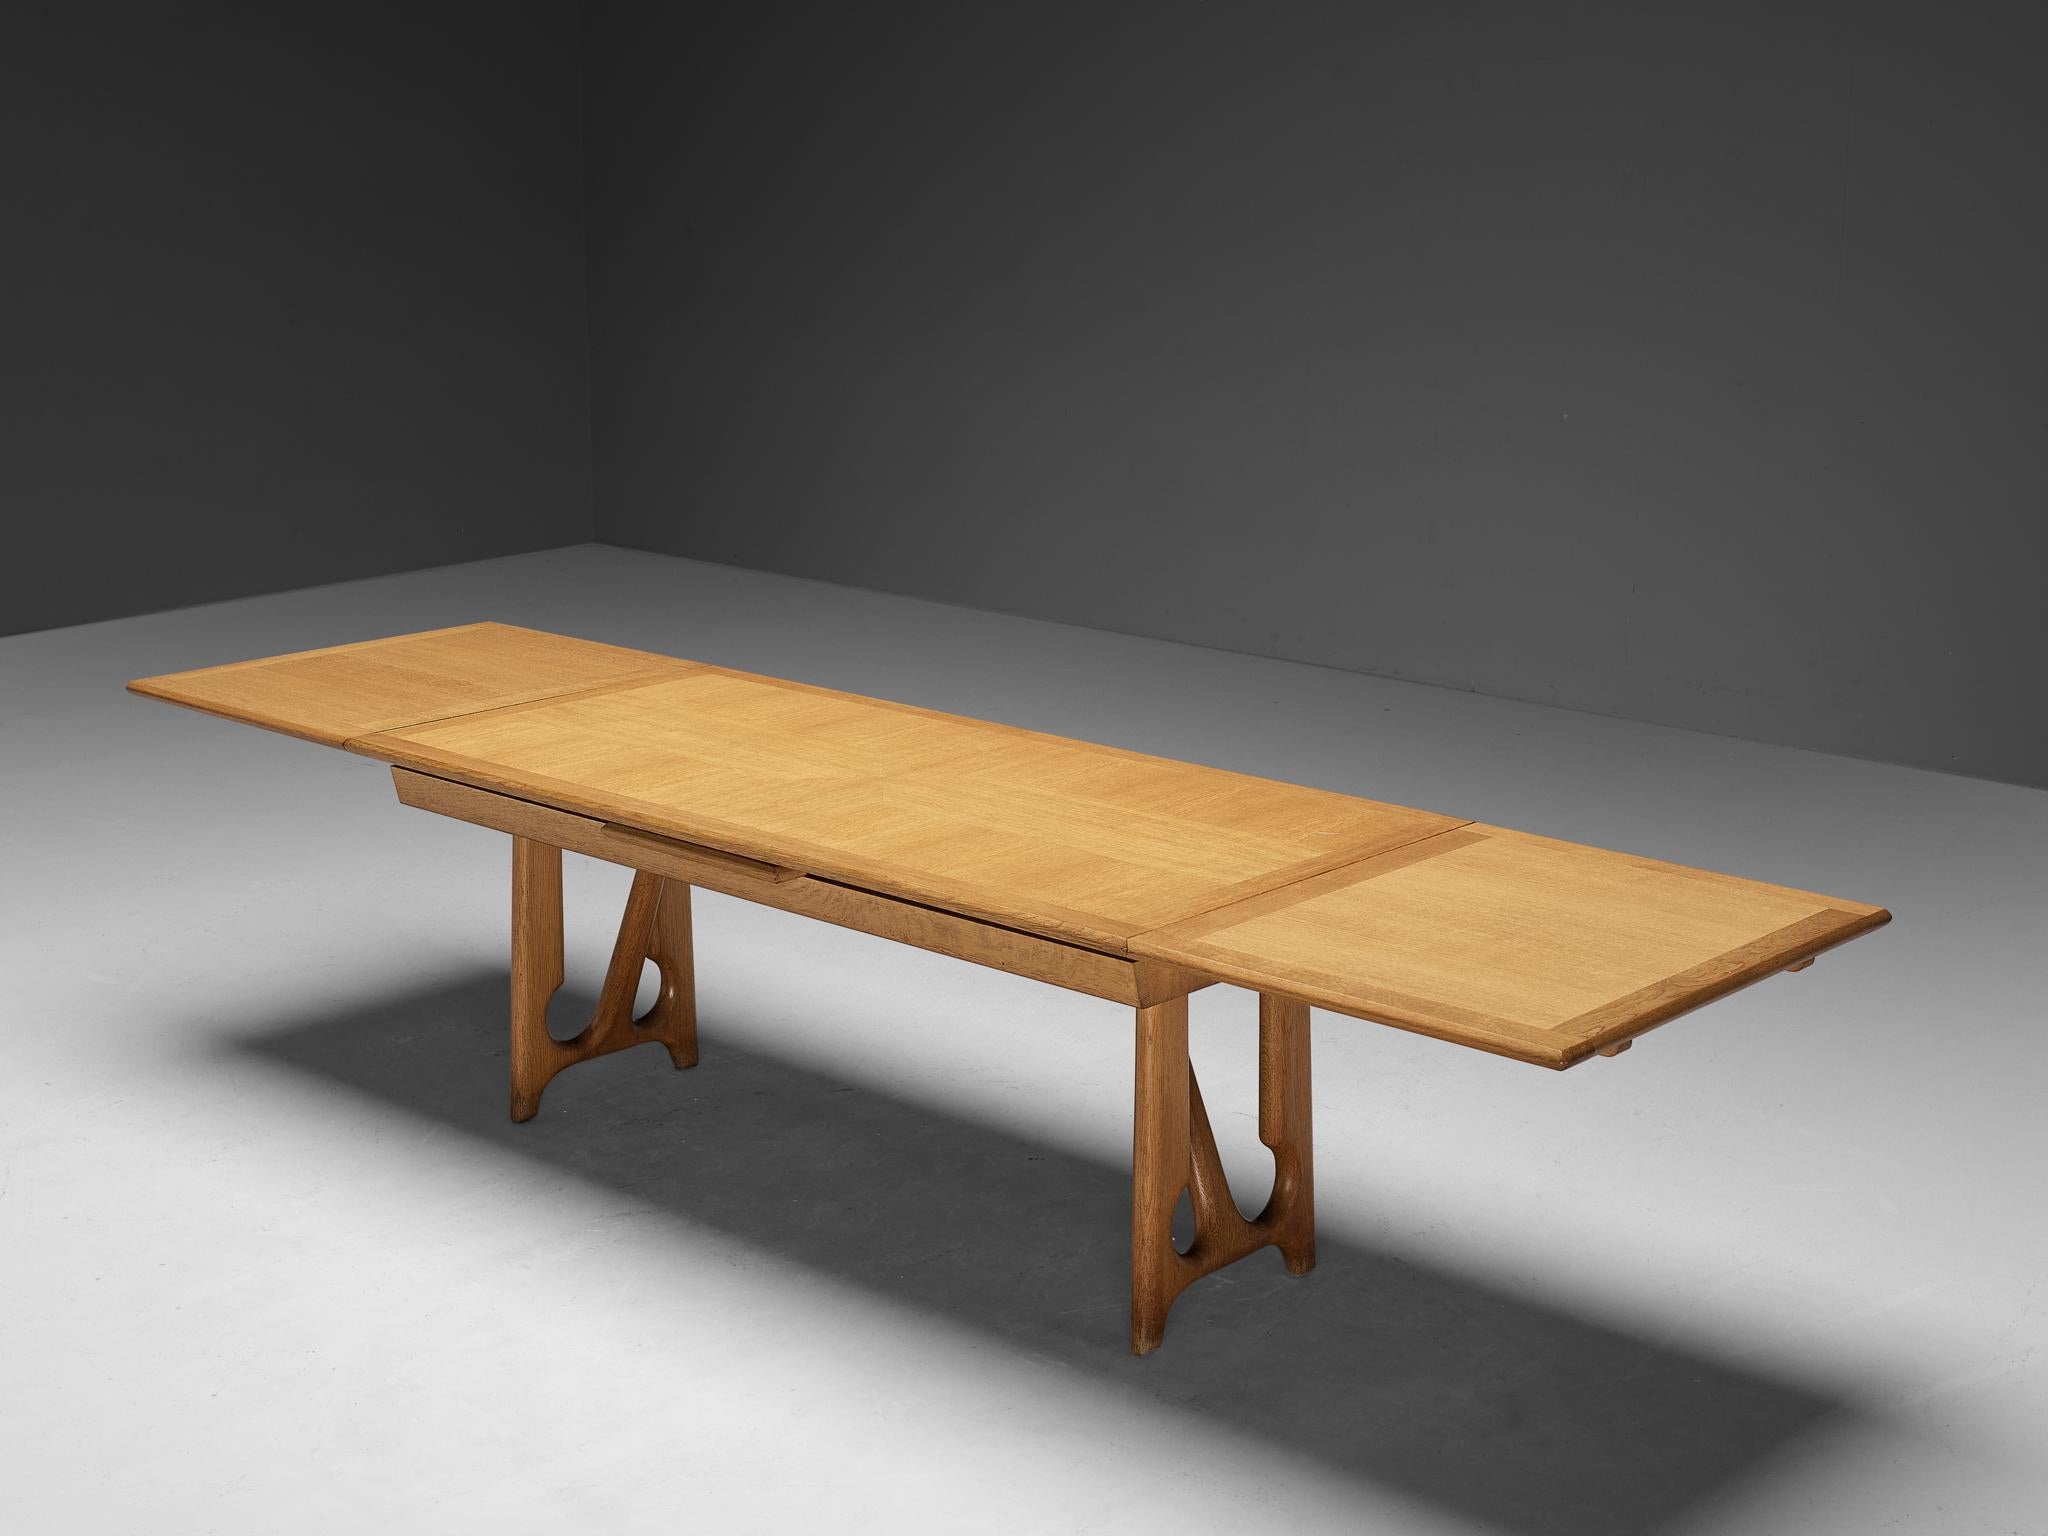 Guillerme et Chambron for Votre Maison, dining table, oak, France, 1965.

Extendable dining table in solid oak by French designers Guillerme and Chambron. This elegant table shows interesting details. Most attractive is the inlayed top. These